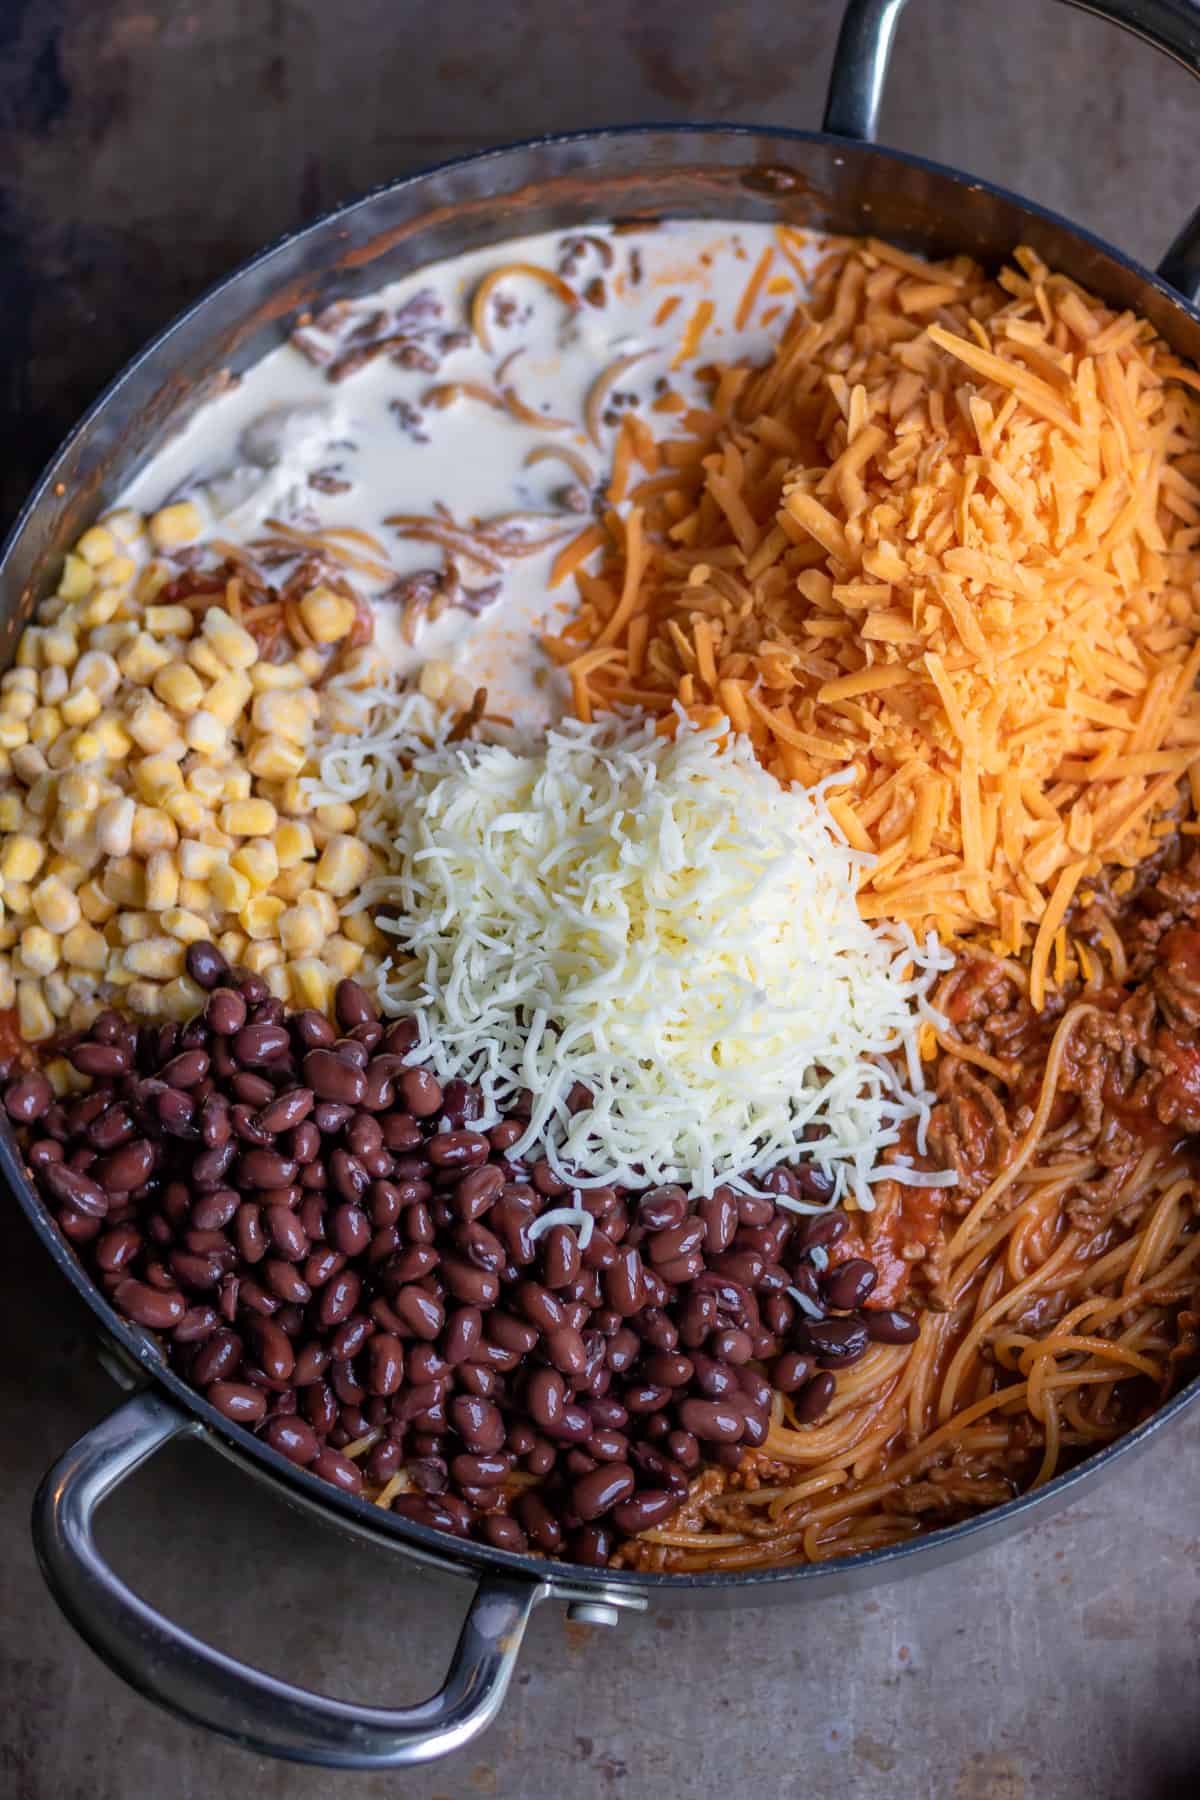 Adding the corn, beans, cream and cheeses to the pot.